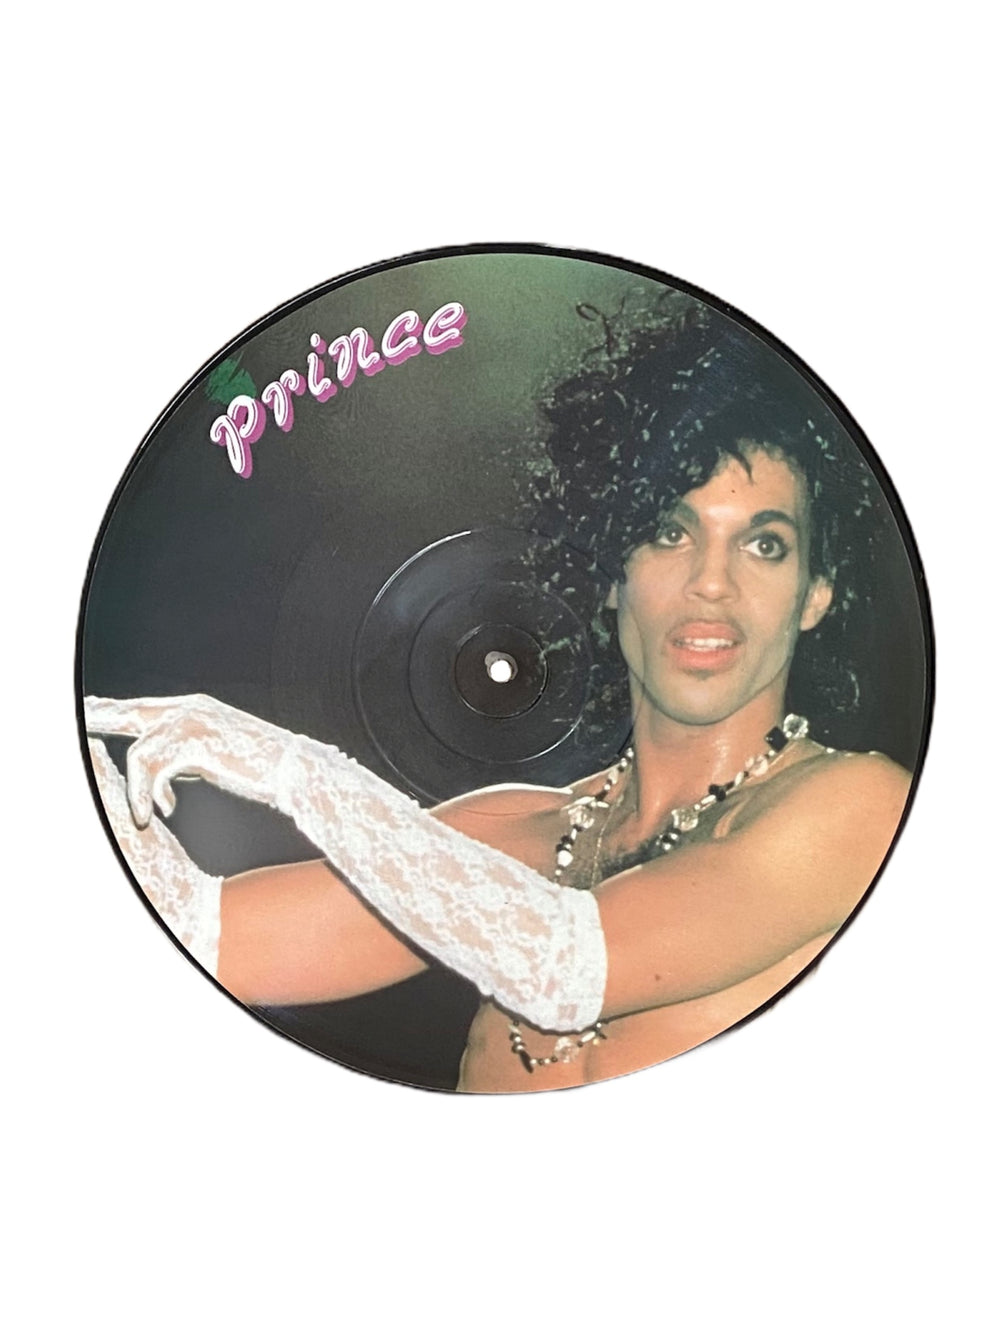 Prince In Conference 12 Inch Vinyl Picture Disc UK Release 1986 SMS